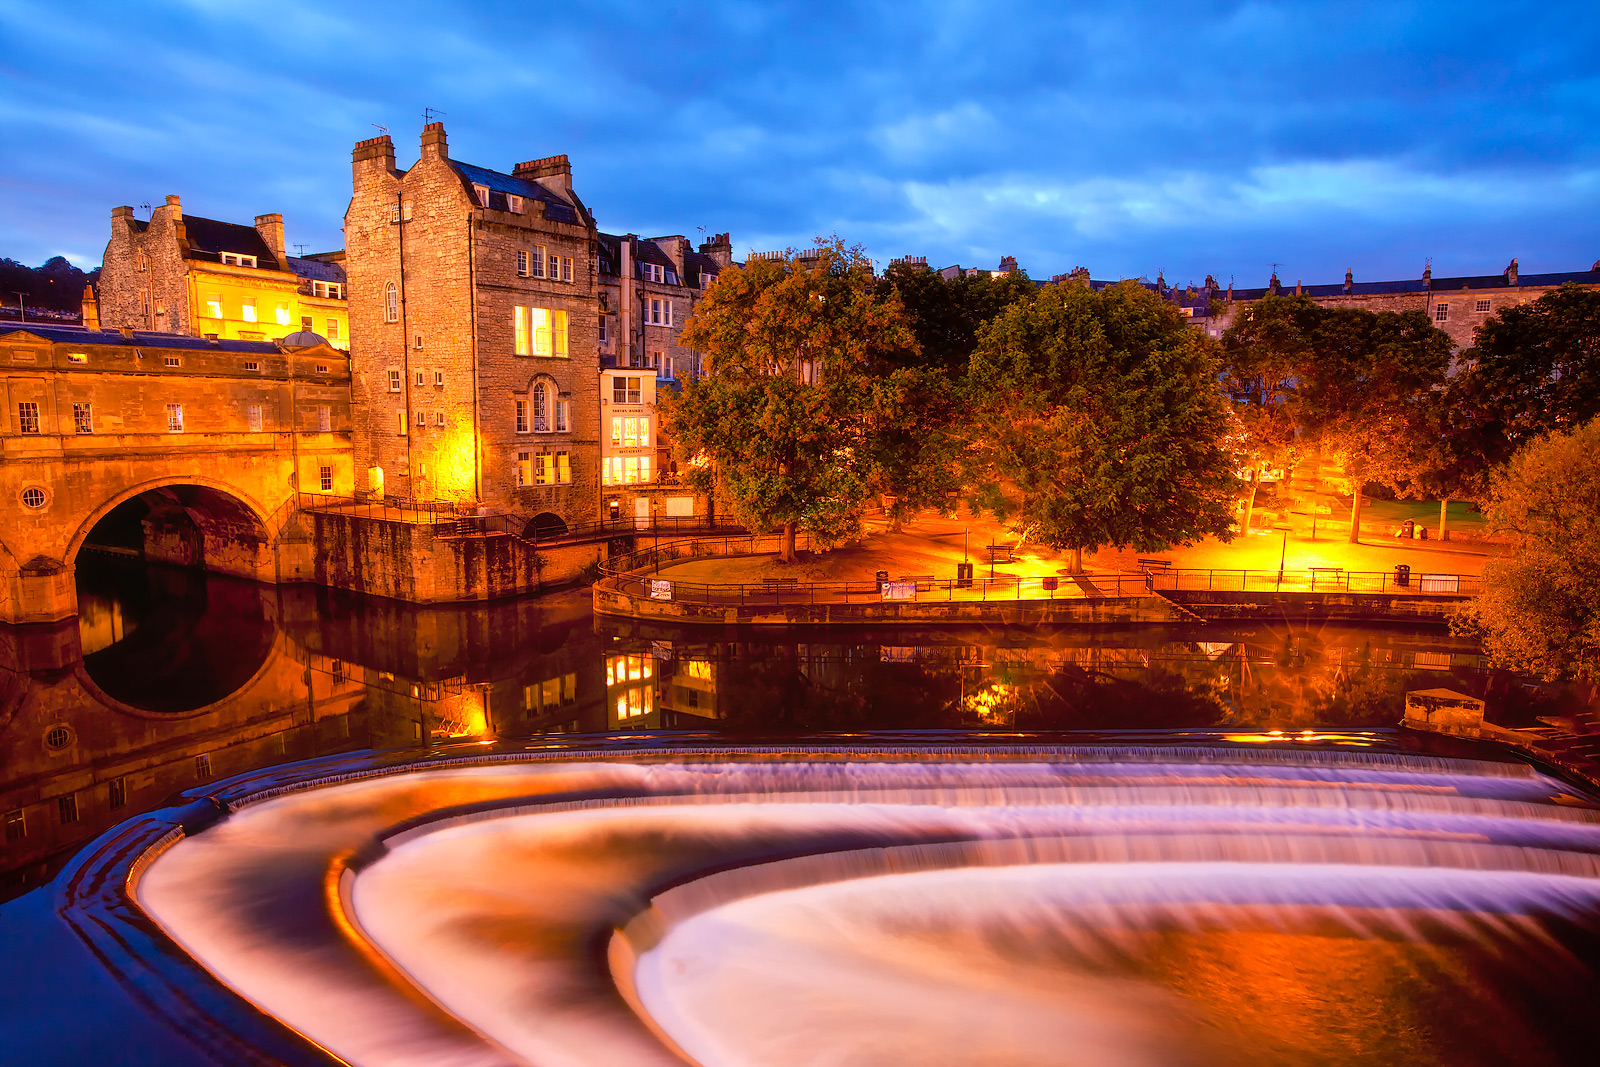 Twlight image of moving water and the Pulteney bridge in the background